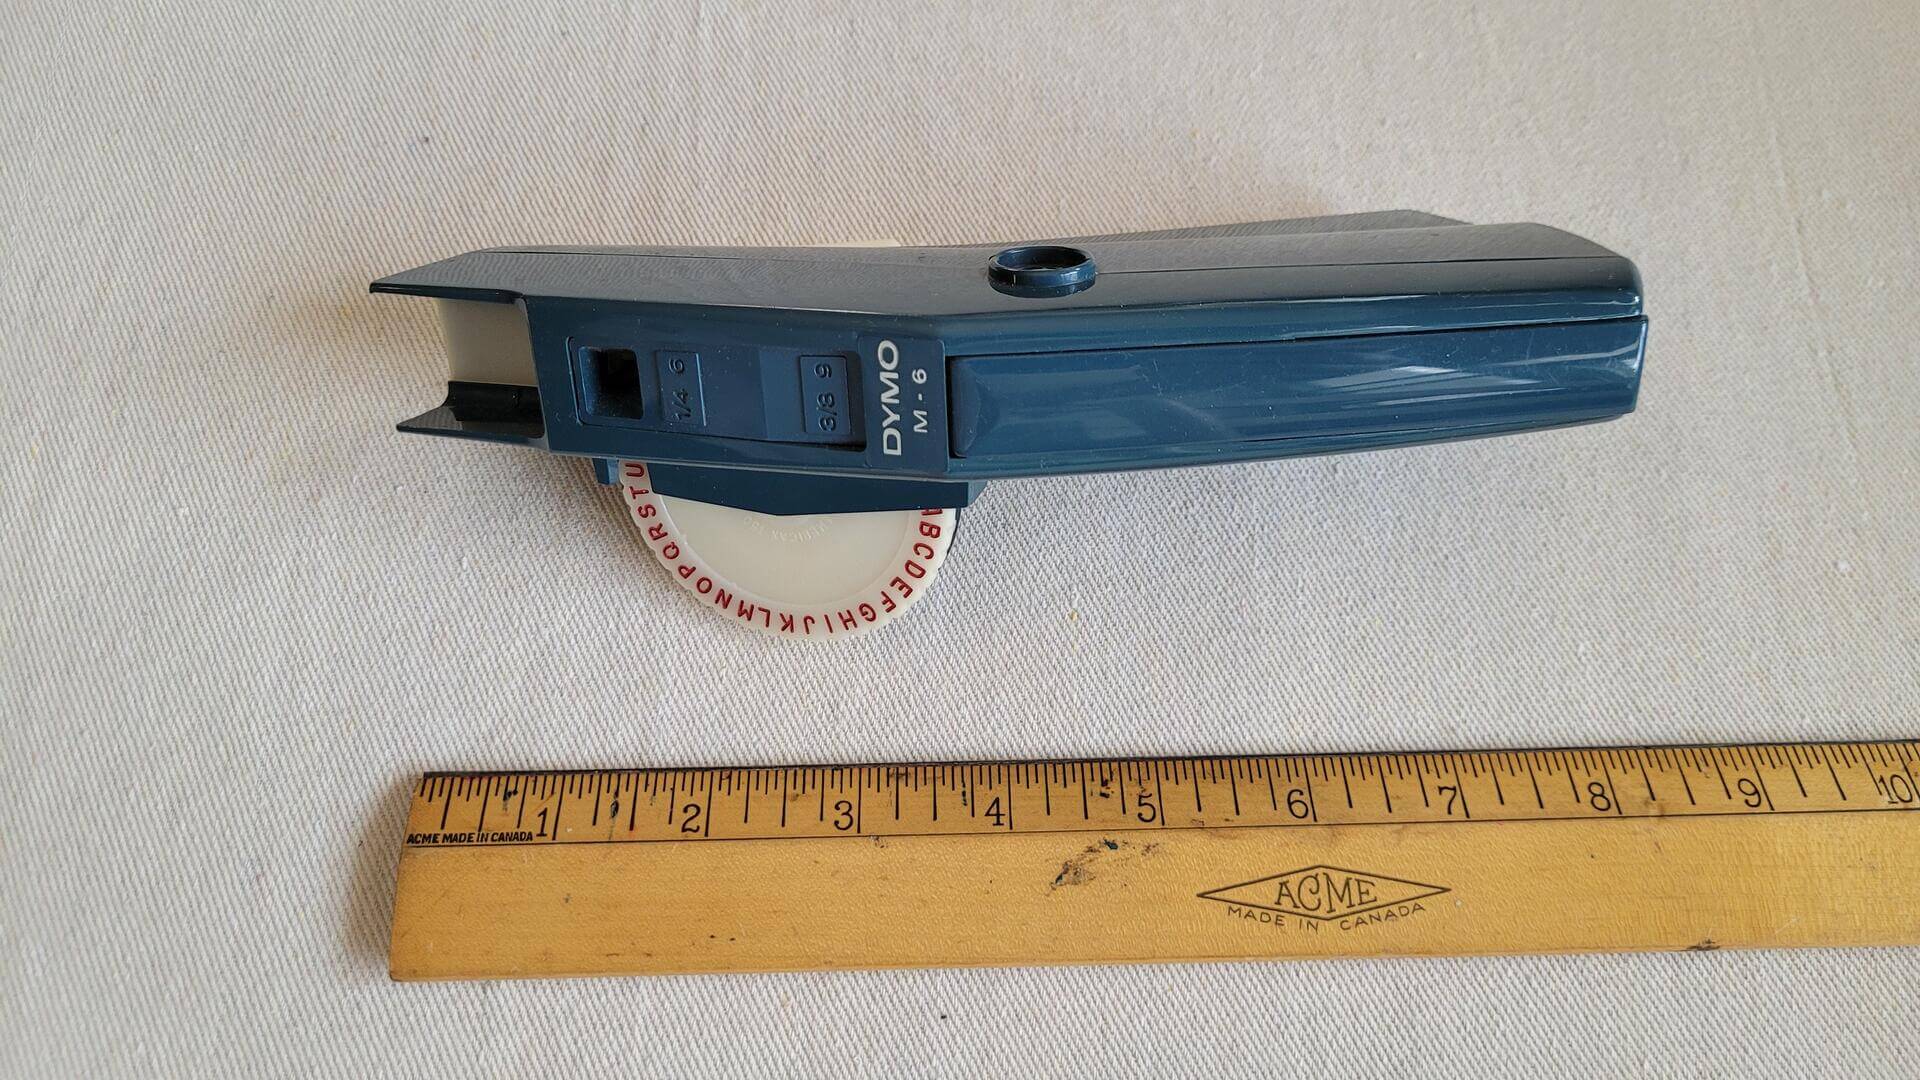 dymo-m-6-embossing-tape-writer-lablel-maker-removable-discs-vintage-1970s-made-in-usa-collectible-office-equipment-tools-measurements